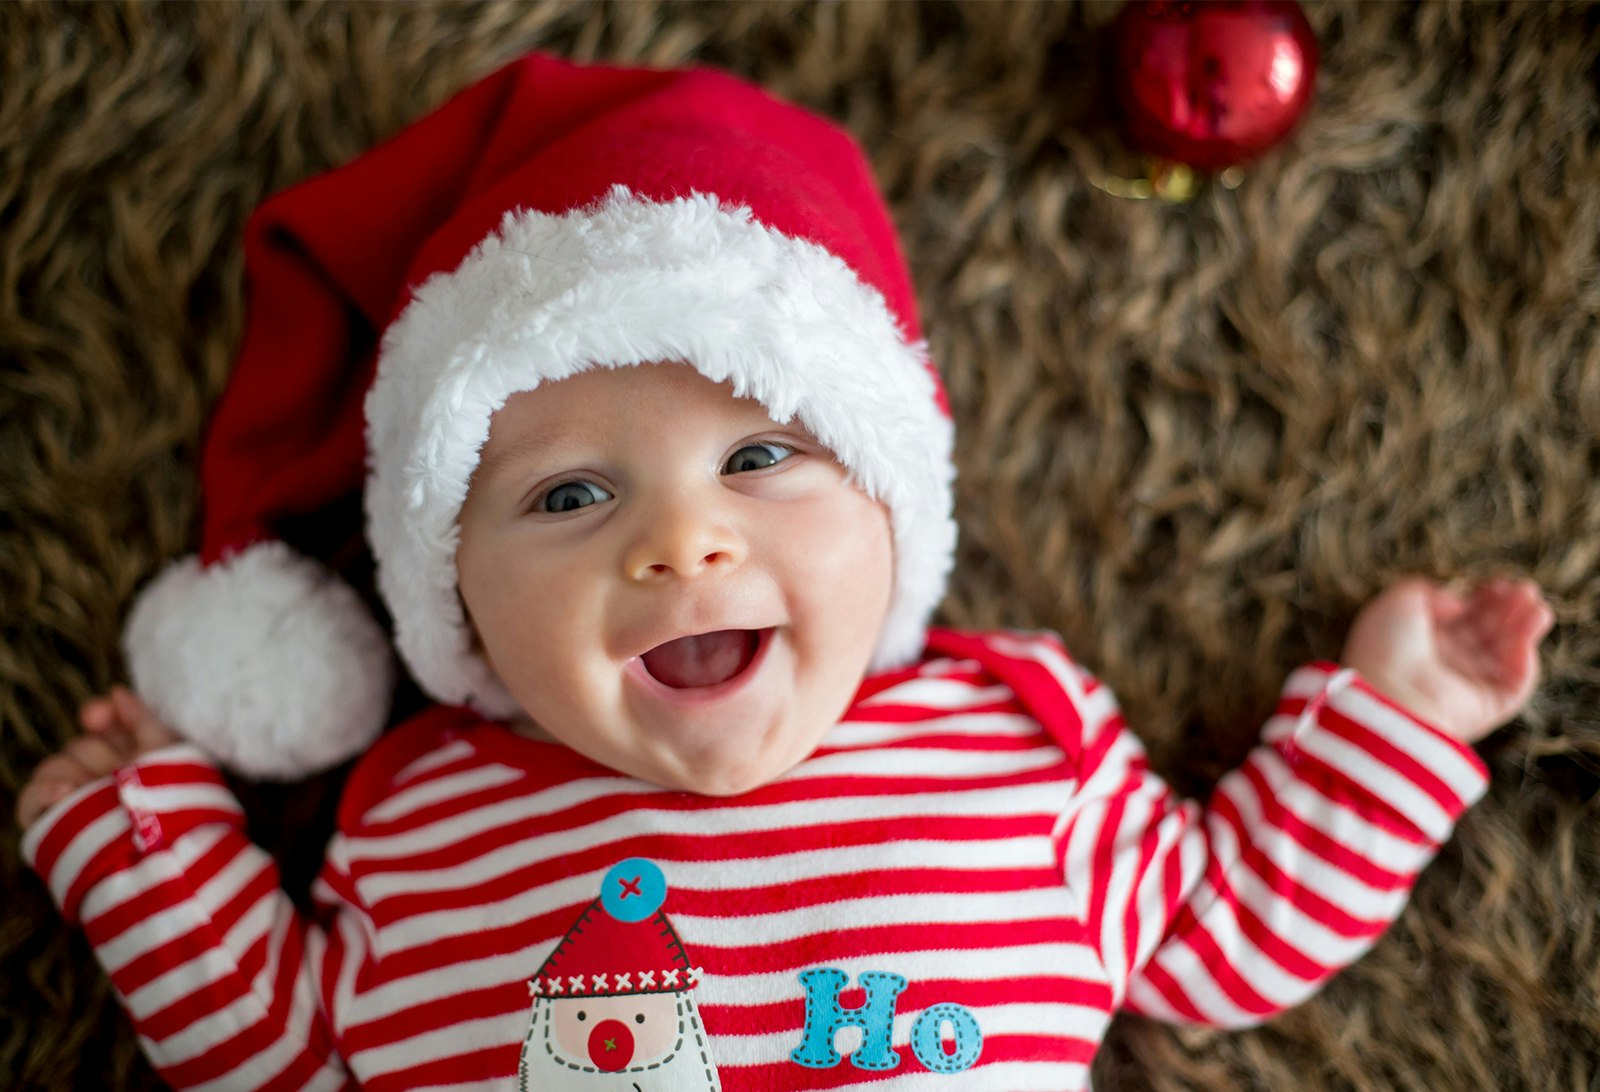 Christmas Gift Ideas for Babies, Toddlers, and Young Kids